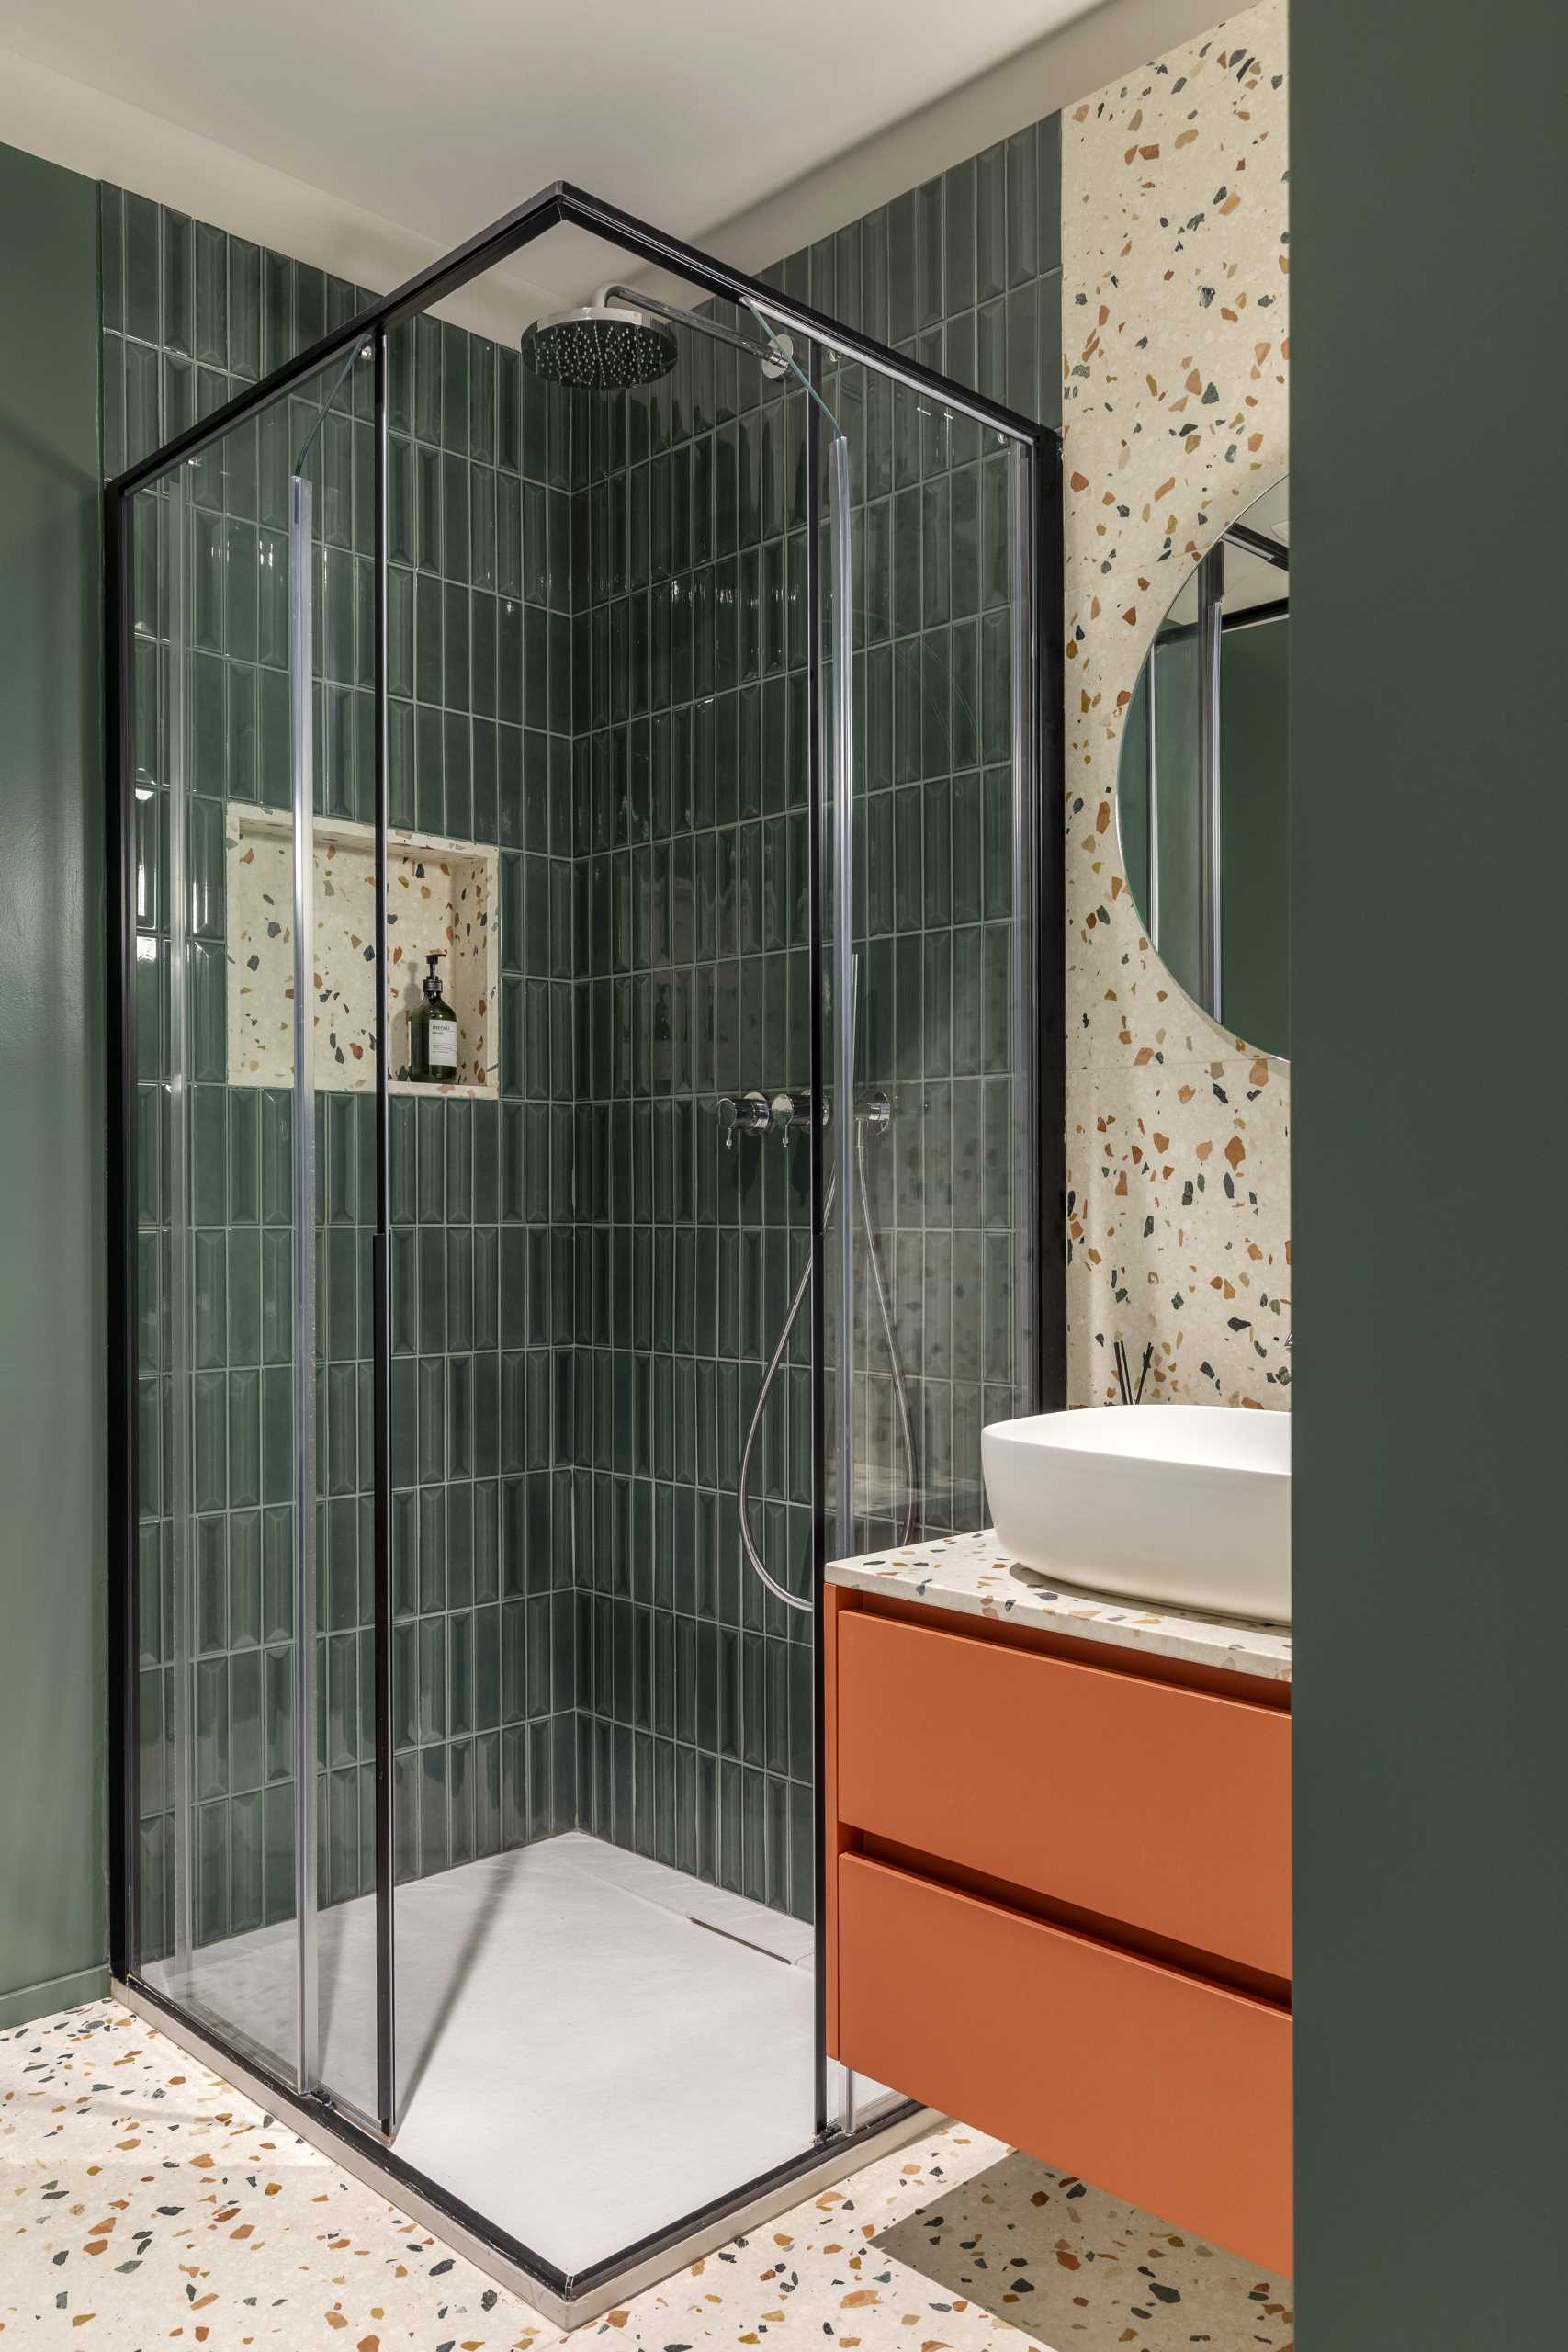 In this guest bathroom, deep green is the chosen color for the tiles and walls, complimenting the various colors found in the Terrazzo resin marble used for the vanity and wall behind the mirror.